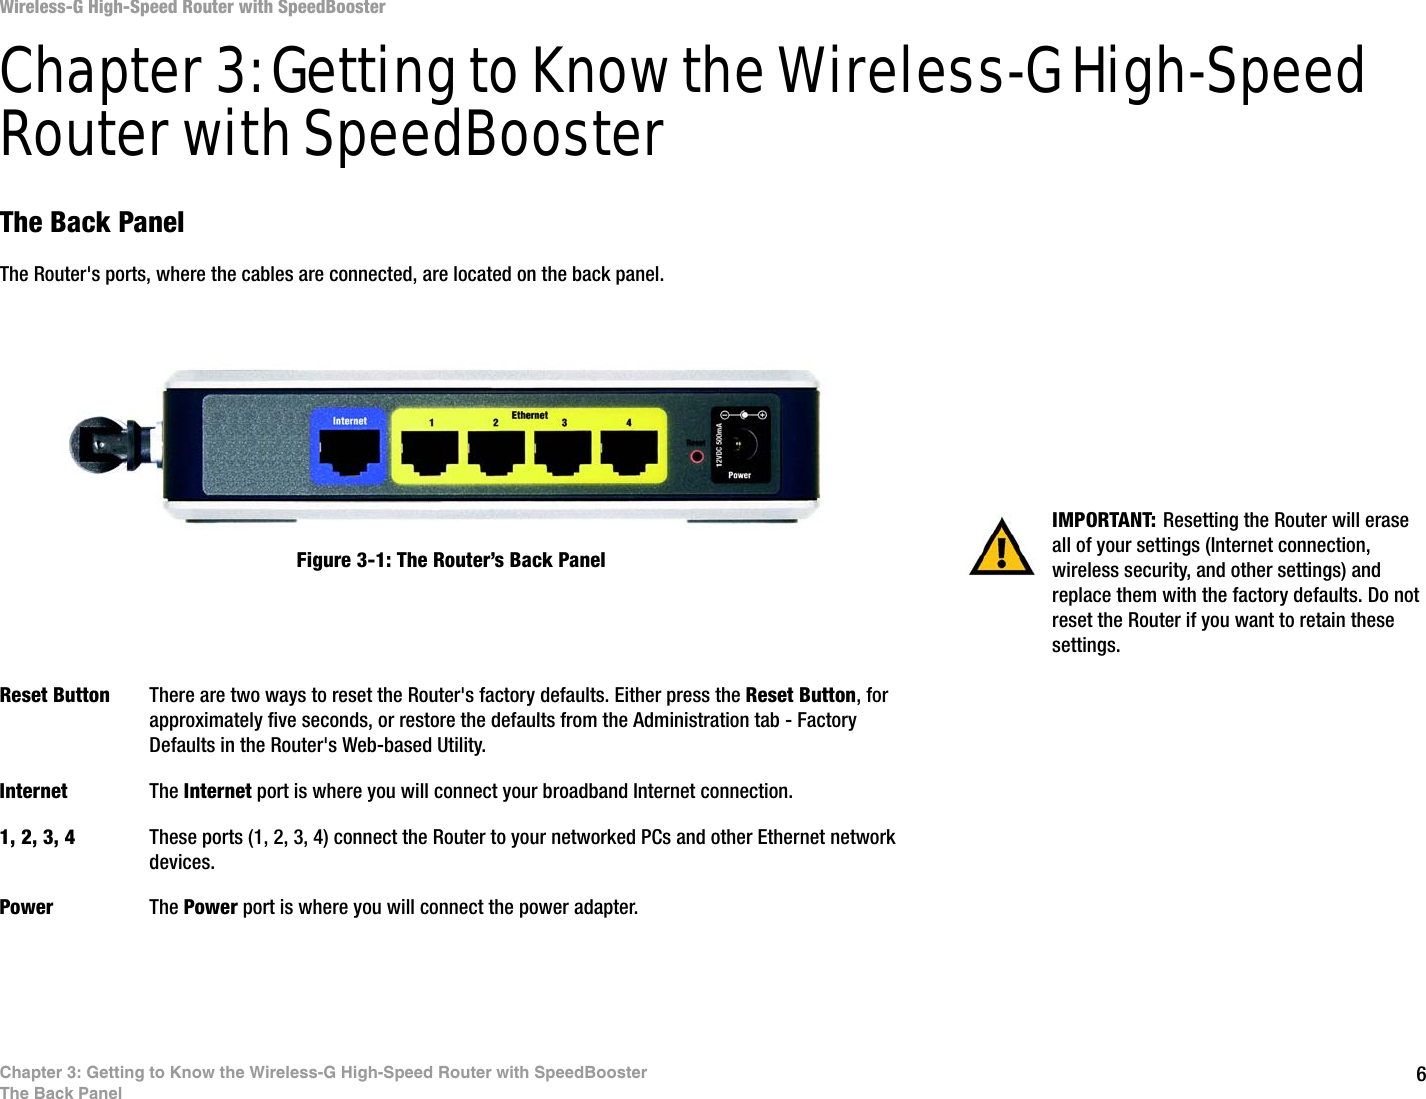 6Chapter 3: Getting to Know the Wireless-G High-Speed Router with SpeedBoosterThe Back PanelWireless-G High-Speed Router with SpeedBoosterChapter 3: Getting to Know the Wireless-G High-Speed Router with SpeedBoosterThe Back PanelThe Router&apos;s ports, where the cables are connected, are located on the back panel.Reset Button There are two ways to reset the Router&apos;s factory defaults. Either press the Reset Button, for approximately five seconds, or restore the defaults from the Administration tab - Factory Defaults in the Router&apos;s Web-based Utility.Internet The Internet port is where you will connect your broadband Internet connection.1, 2, 3, 4 These ports (1, 2, 3, 4) connect the Router to your networked PCs and other Ethernet network devices.Power The Power port is where you will connect the power adapter.IMPORTANT: Resetting the Router will erase all of your settings (Internet connection, wireless security, and other settings) and replace them with the factory defaults. Do not reset the Router if you want to retain these settings.Figure 3-1: The Router’s Back Panel